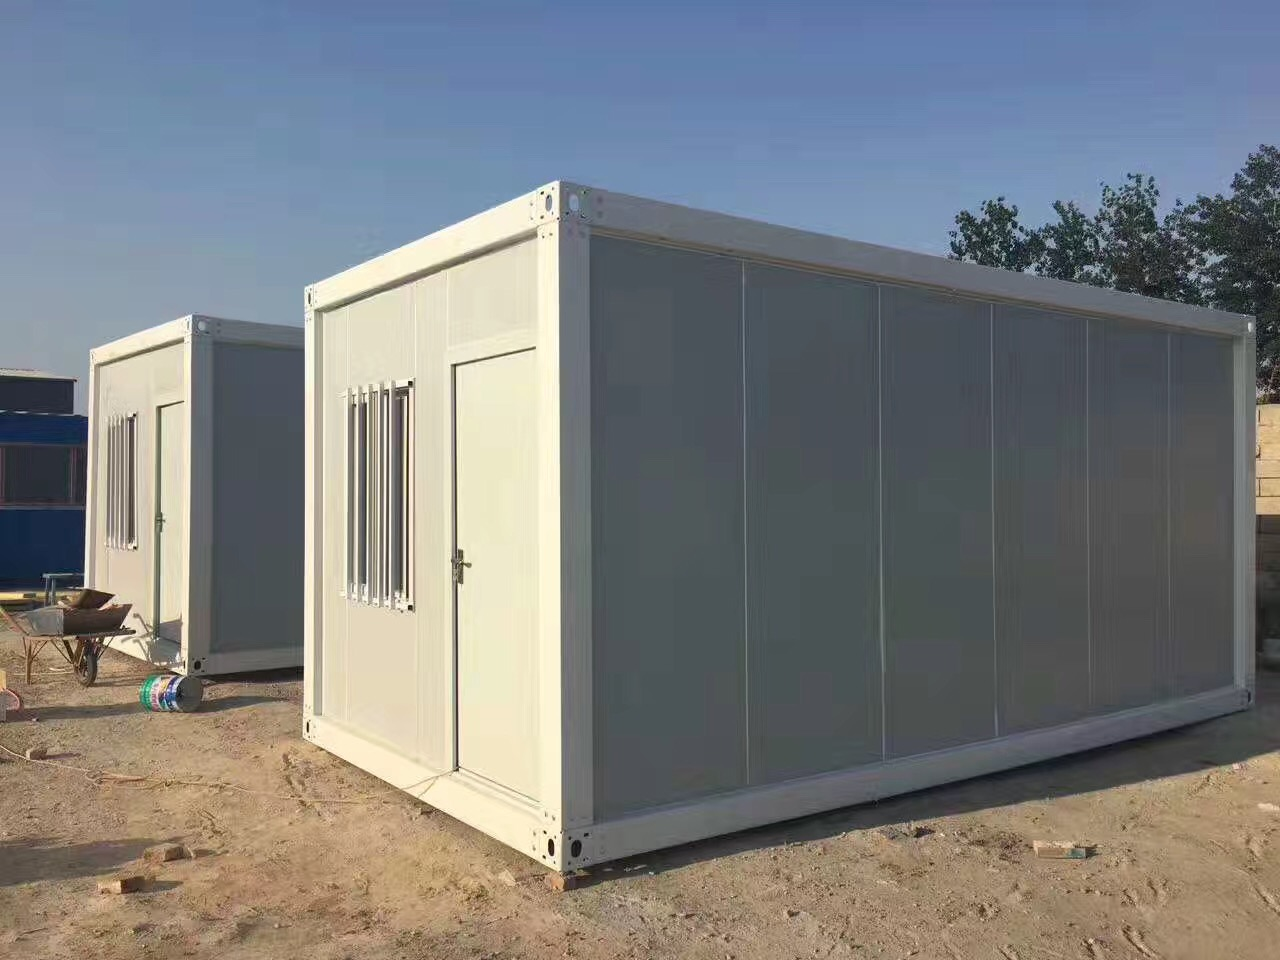 portable pre fabricated kit modular shipping container house homes